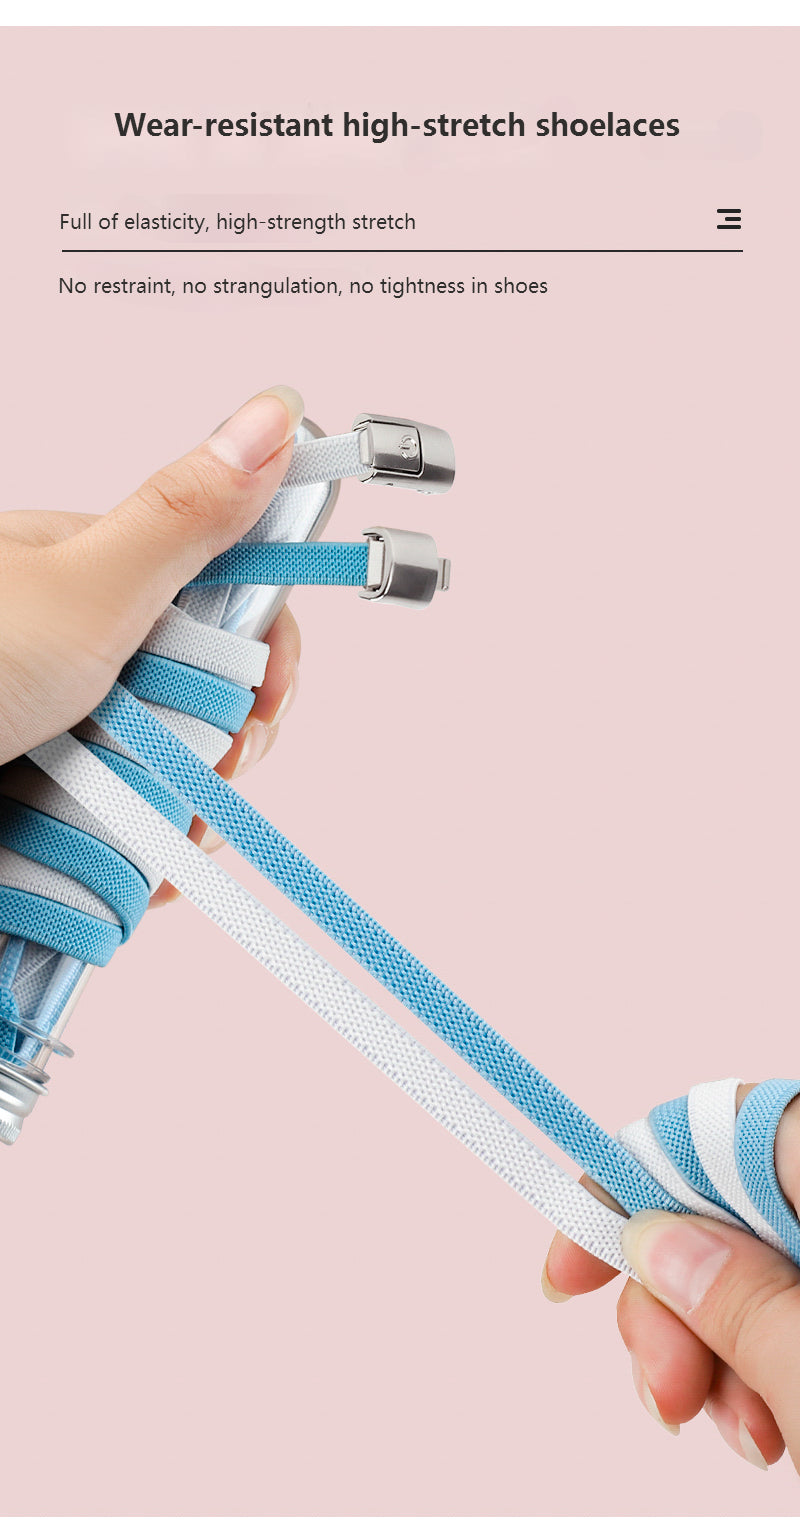 Easy-to-Use Press Lock Shoelaces - No Ties Needed! Perfect for Kids and Adults!